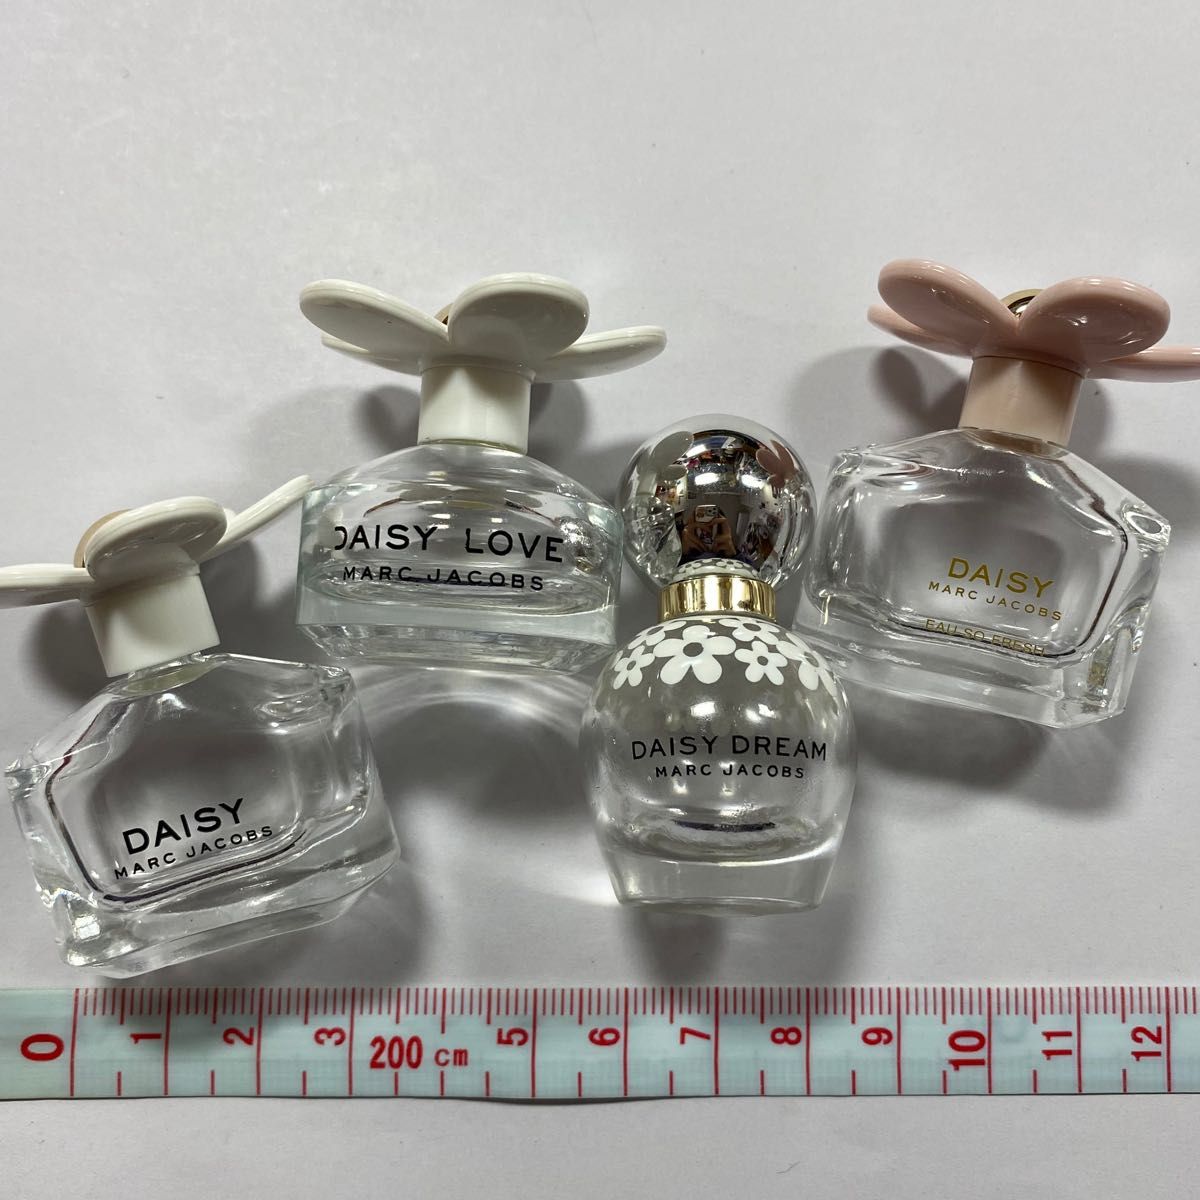 marcjacobs マークジェイコブス 空瓶 4ml｜PayPayフリマ